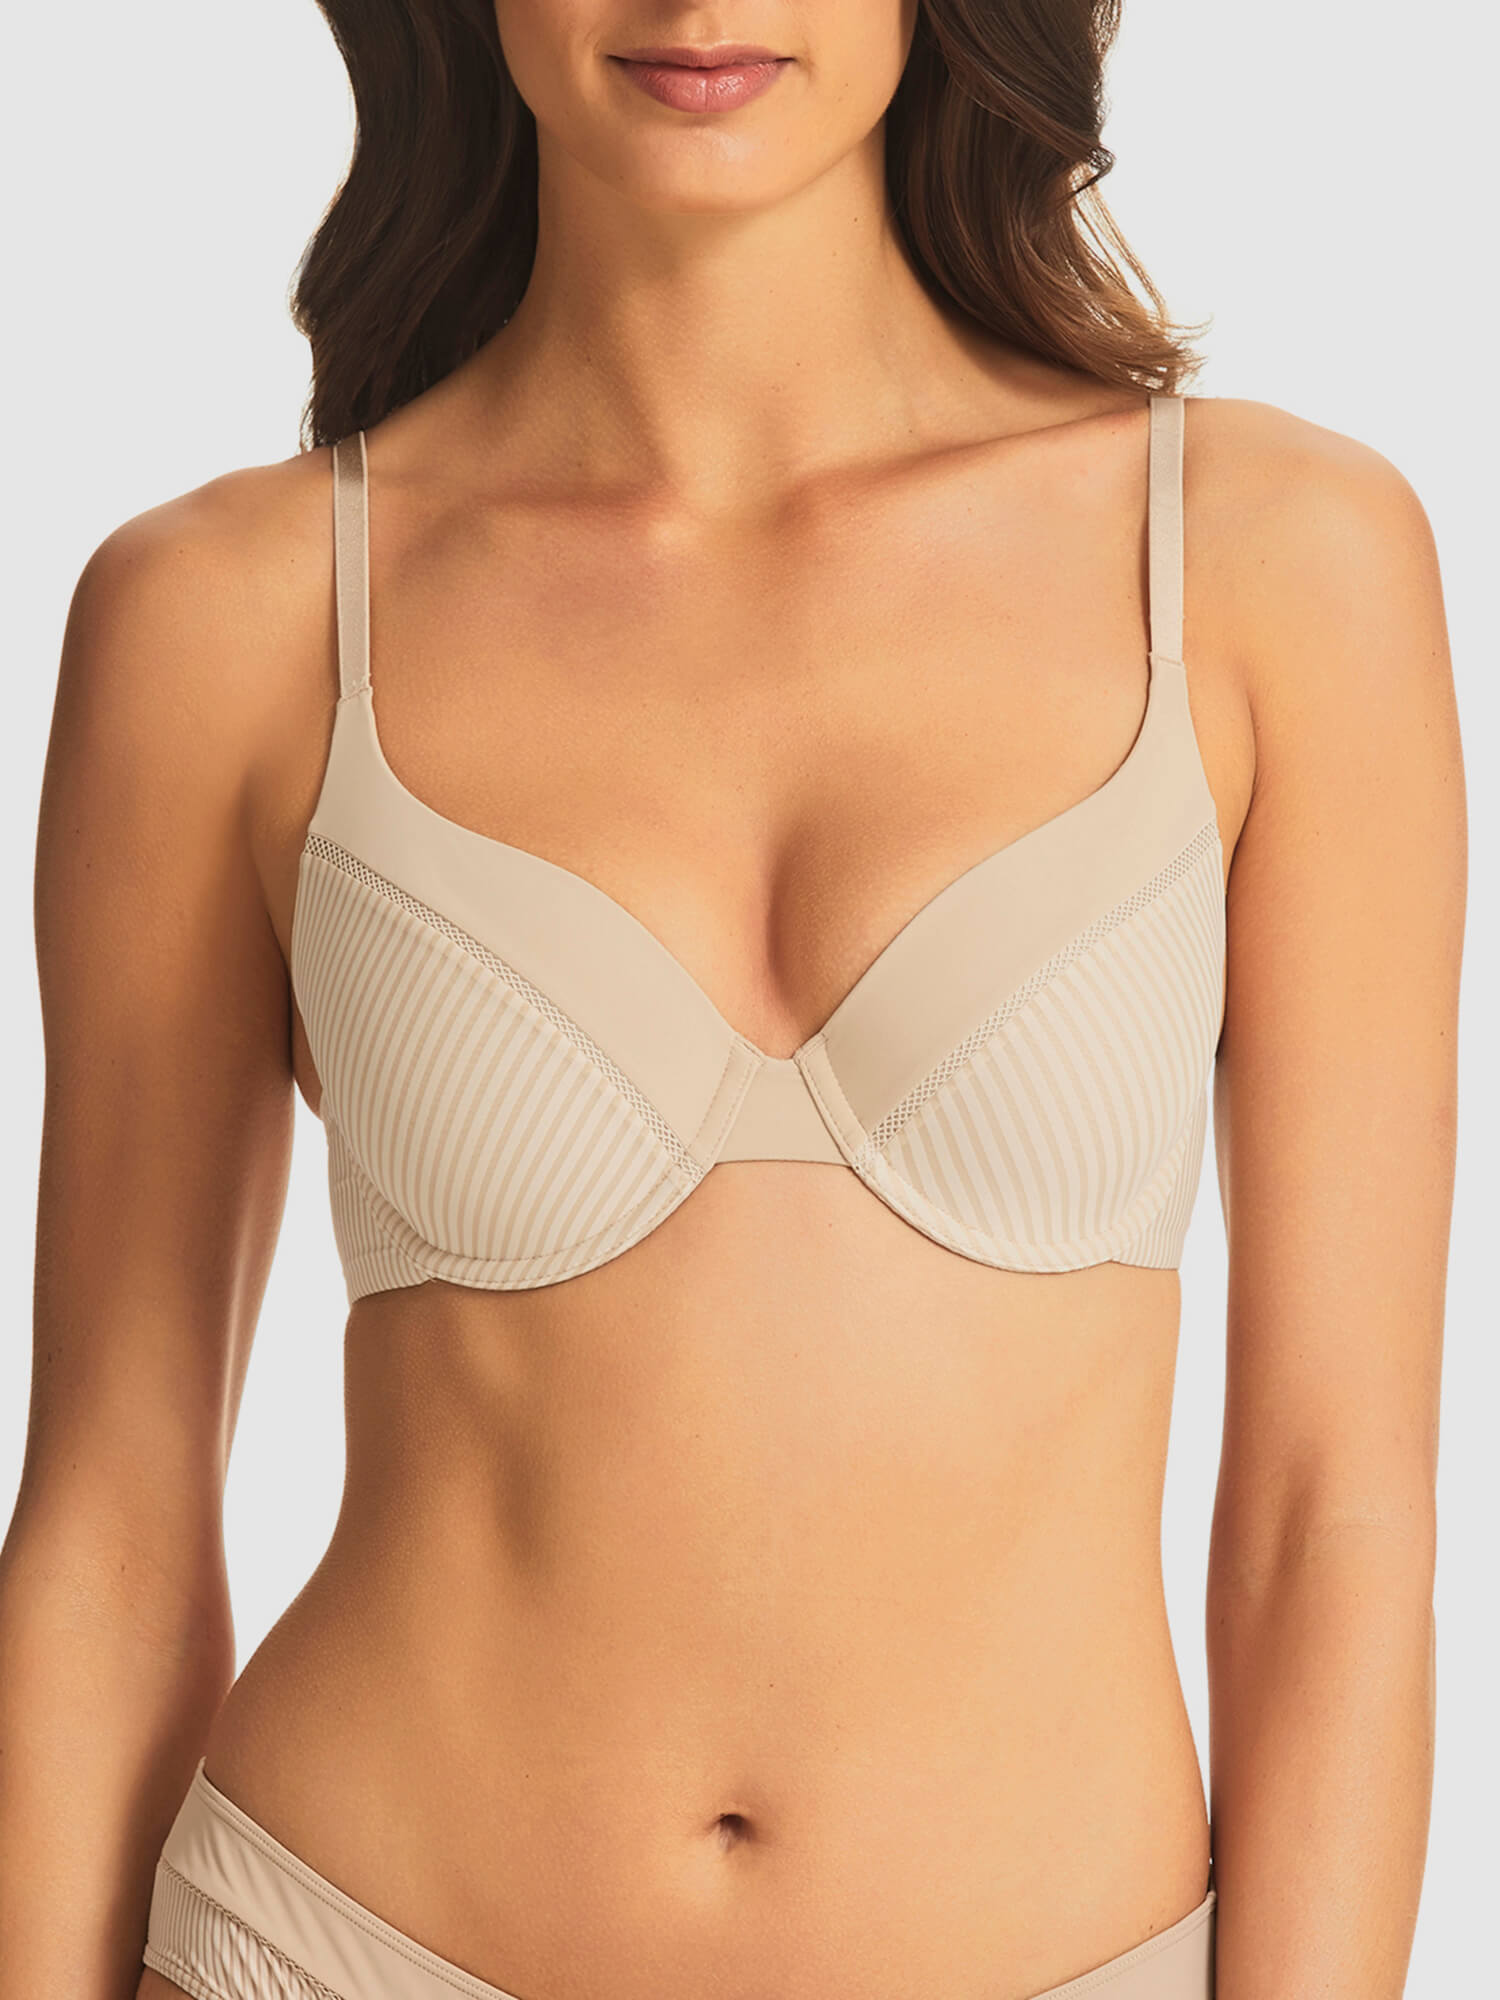 Why is my bra gaping at the top? - Fine Lines Lingerie